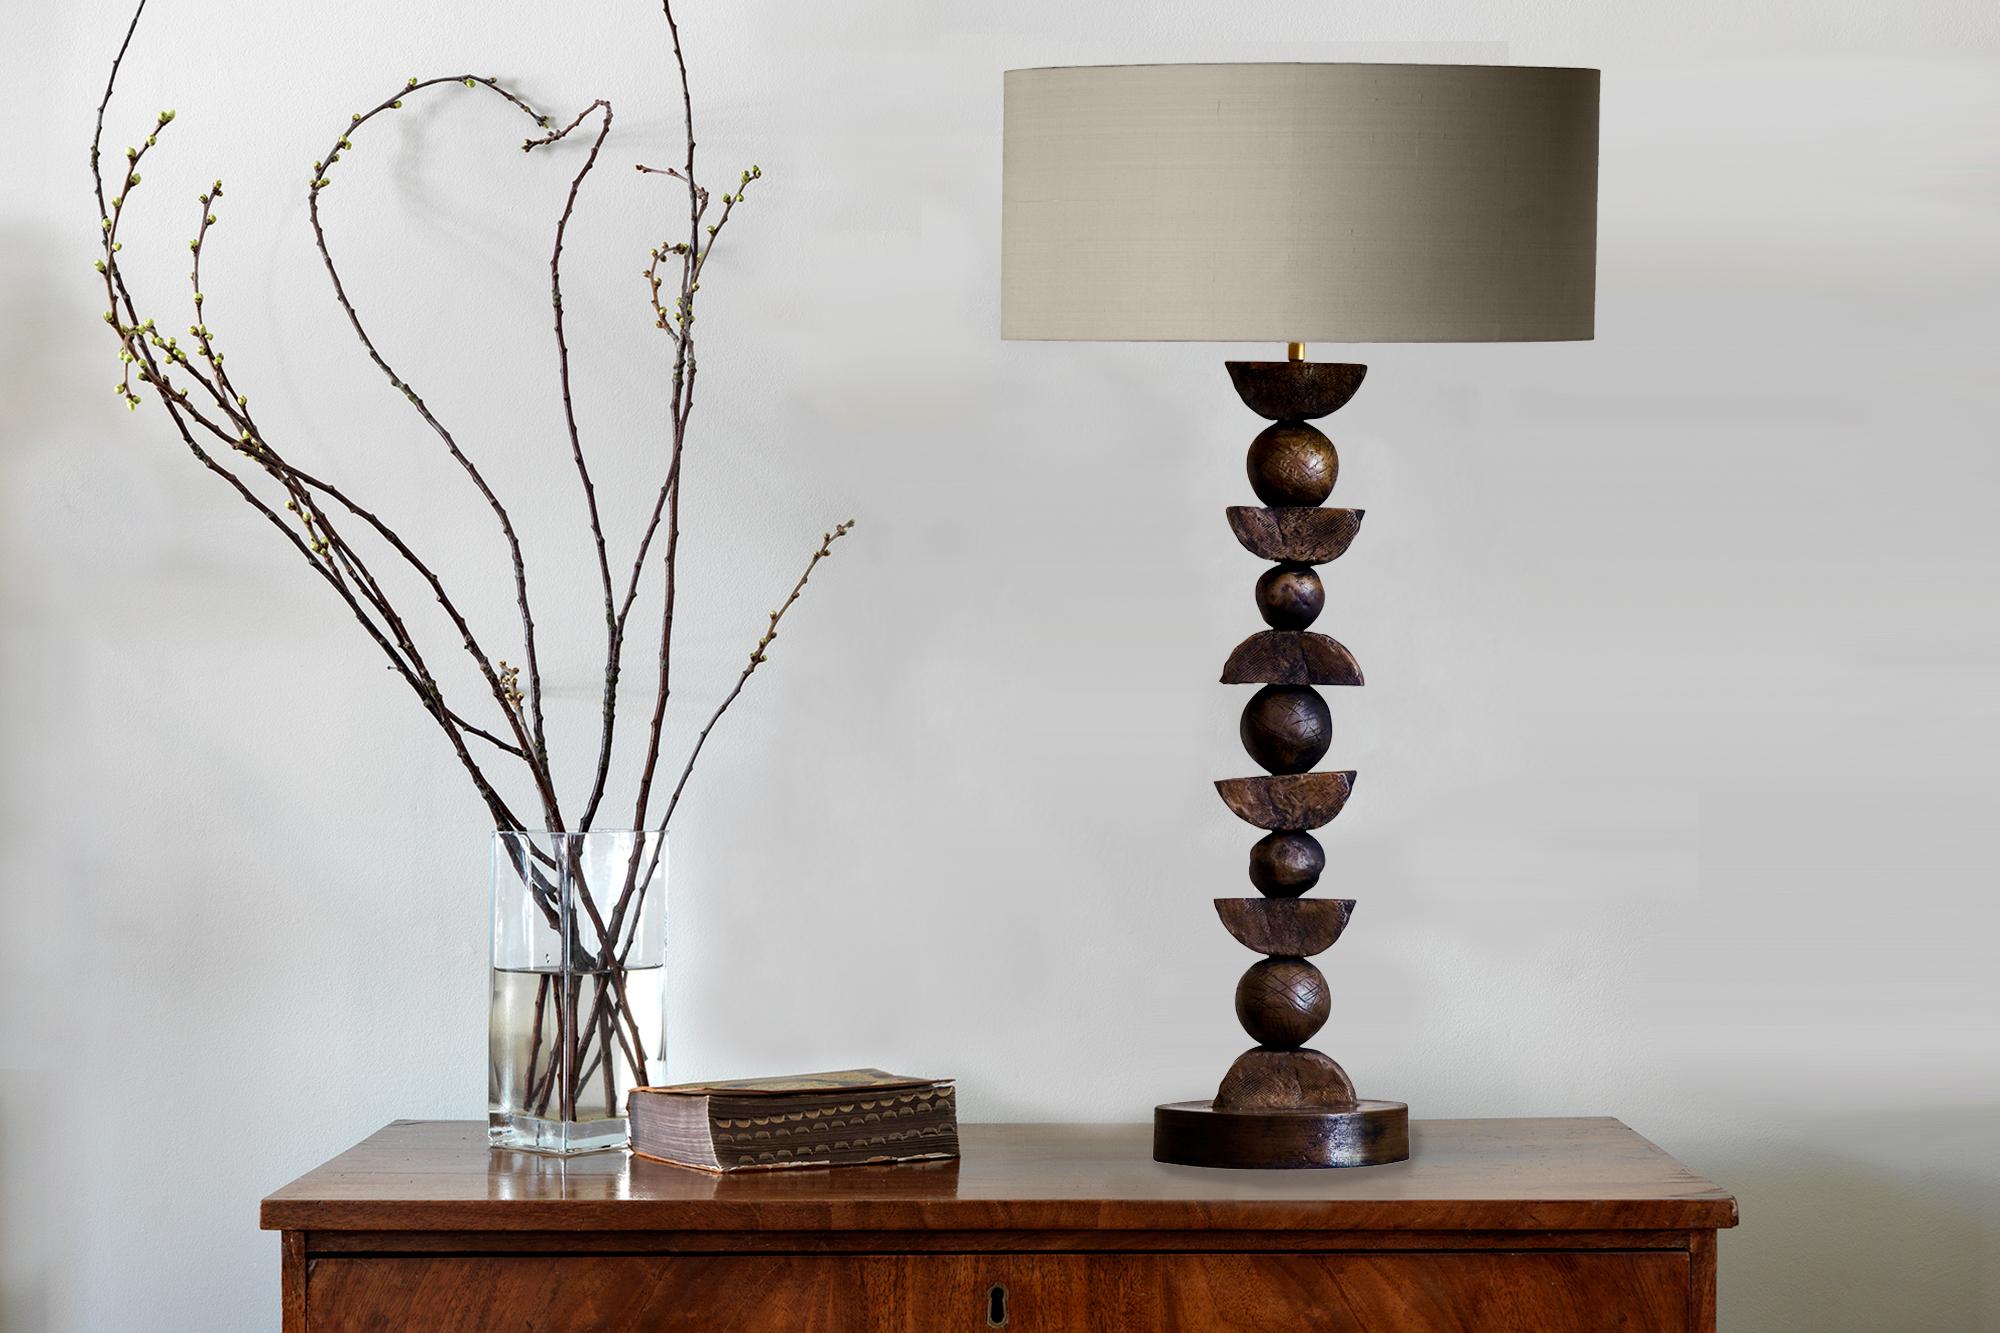 New collection: This contemporary Margit Wittig bronze table lamp sits on a round base . The material Wittig chose for this unique 21st century table lamp is Bronze , which gives this functional object of art a visual focus for luxury